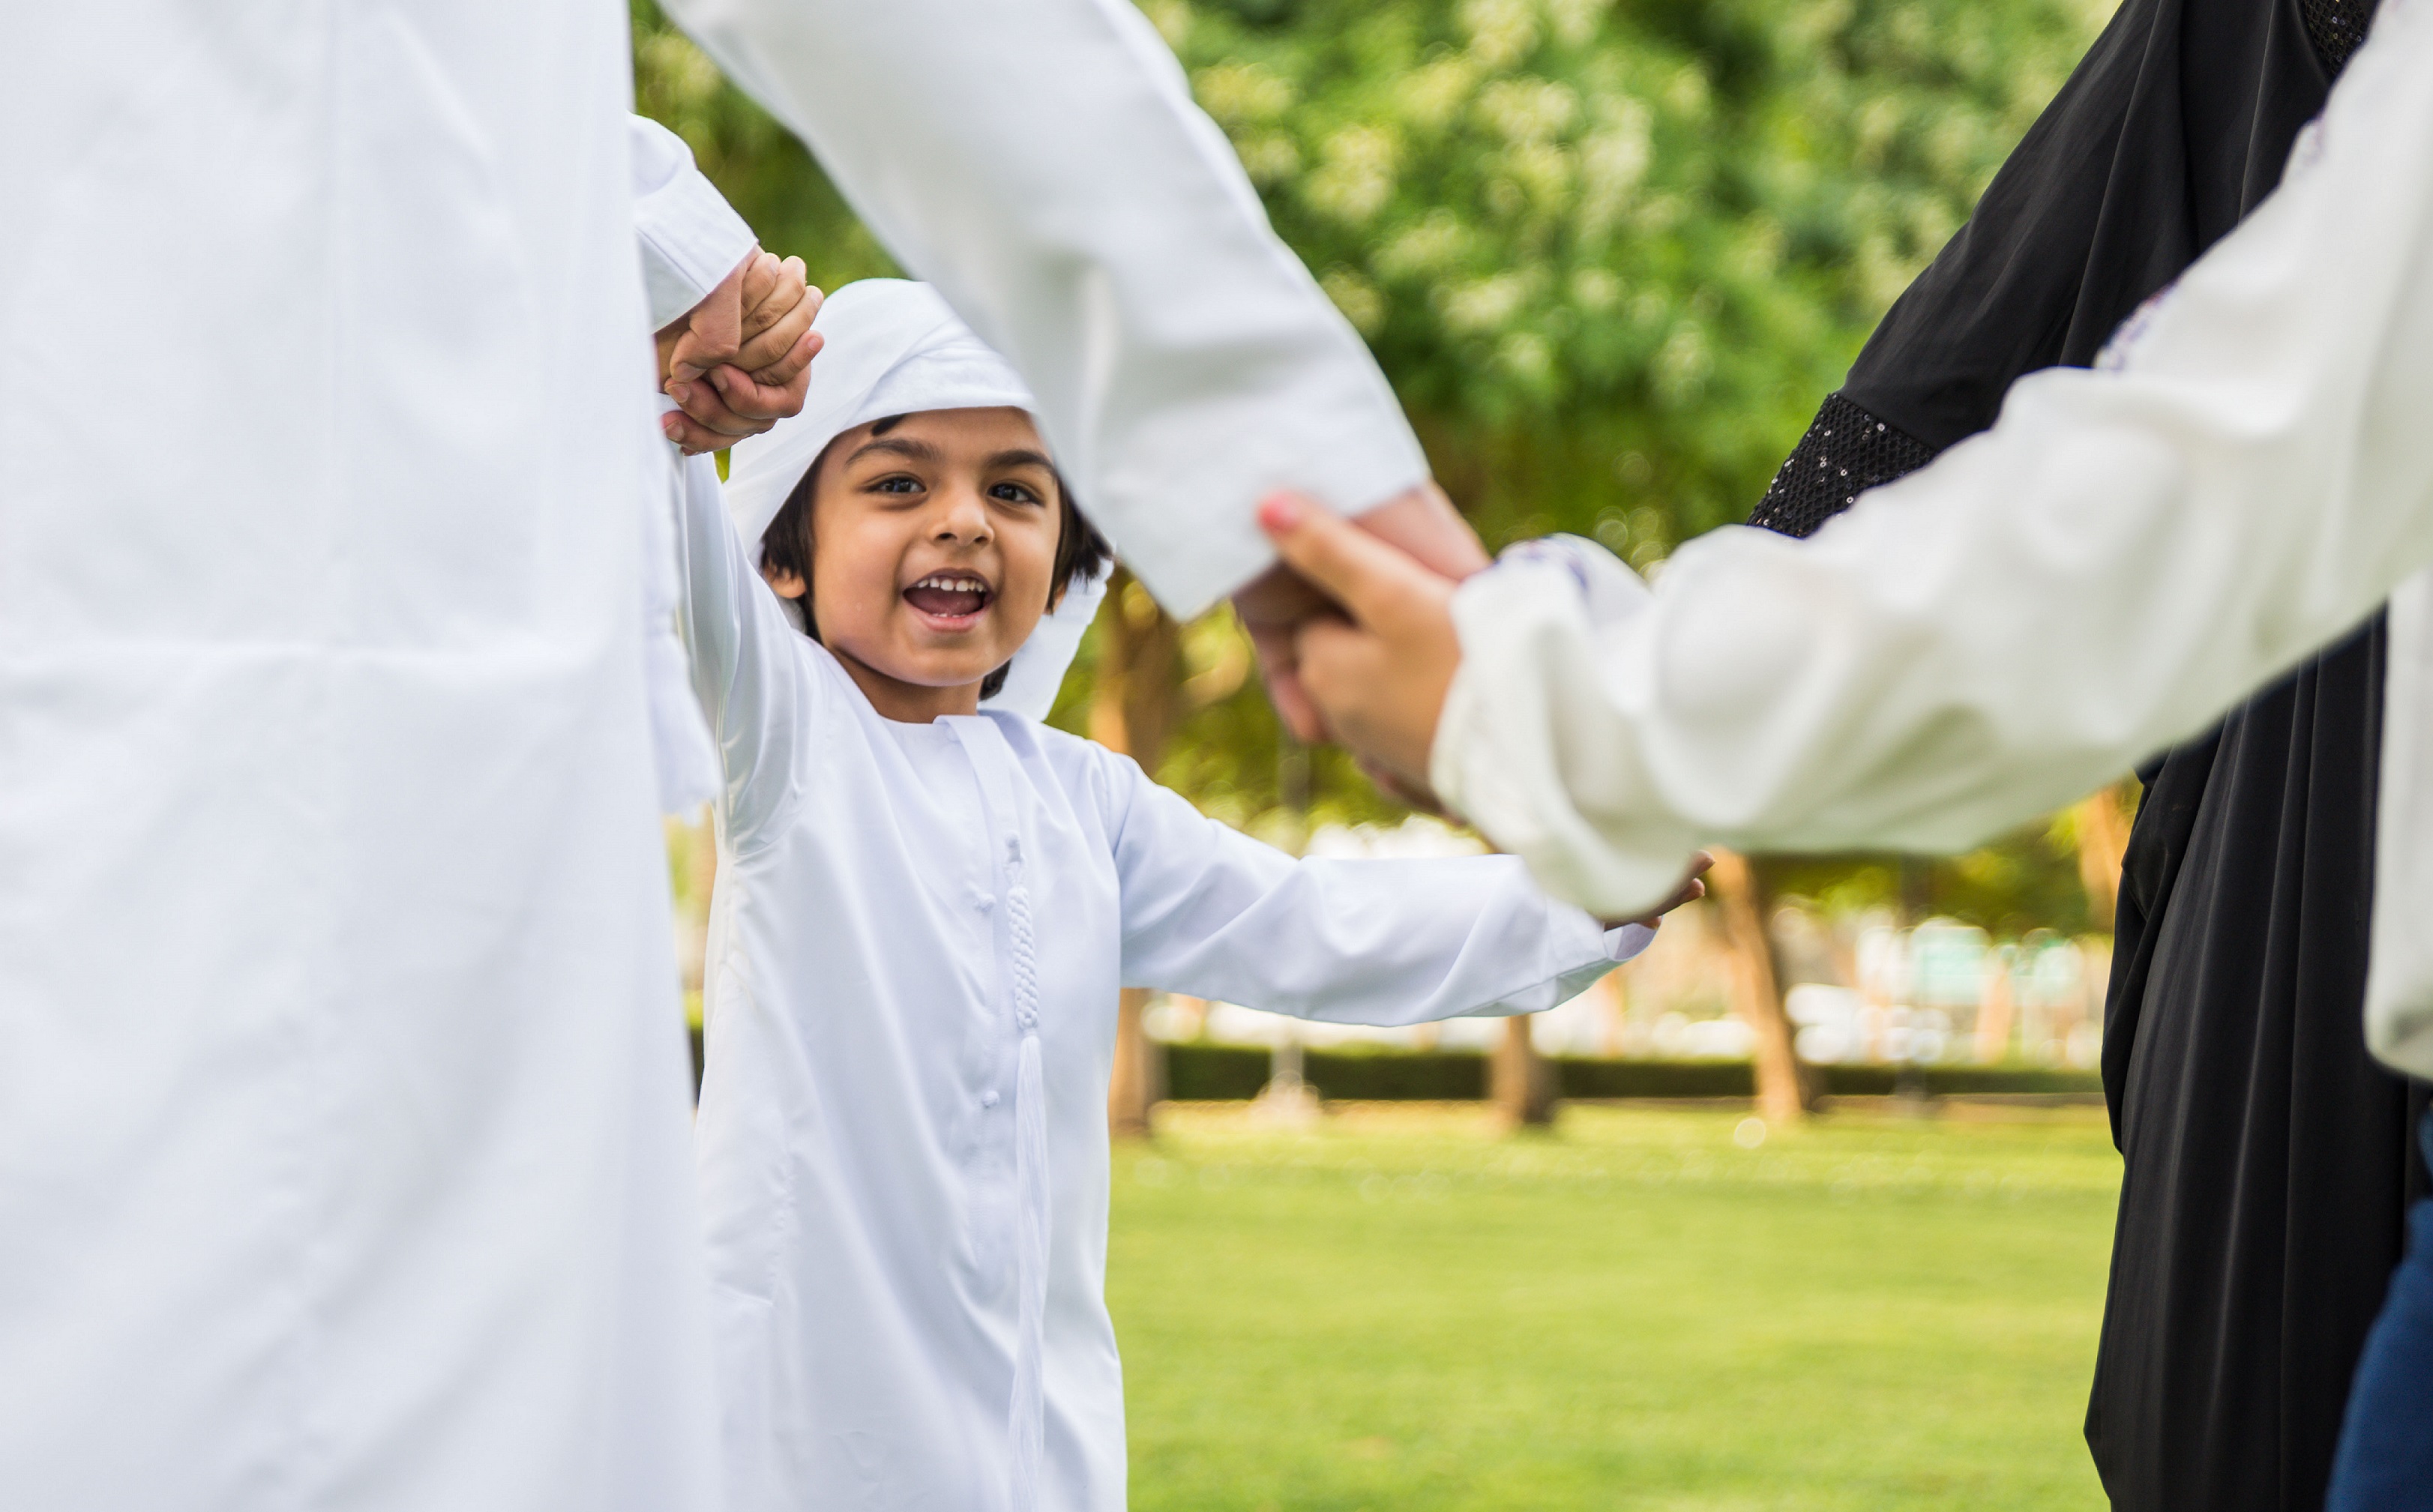 mubadala-health-and-abu-dhabi-early-childhood-authority-establish-a-pilot-program-to-support-parents-and-children